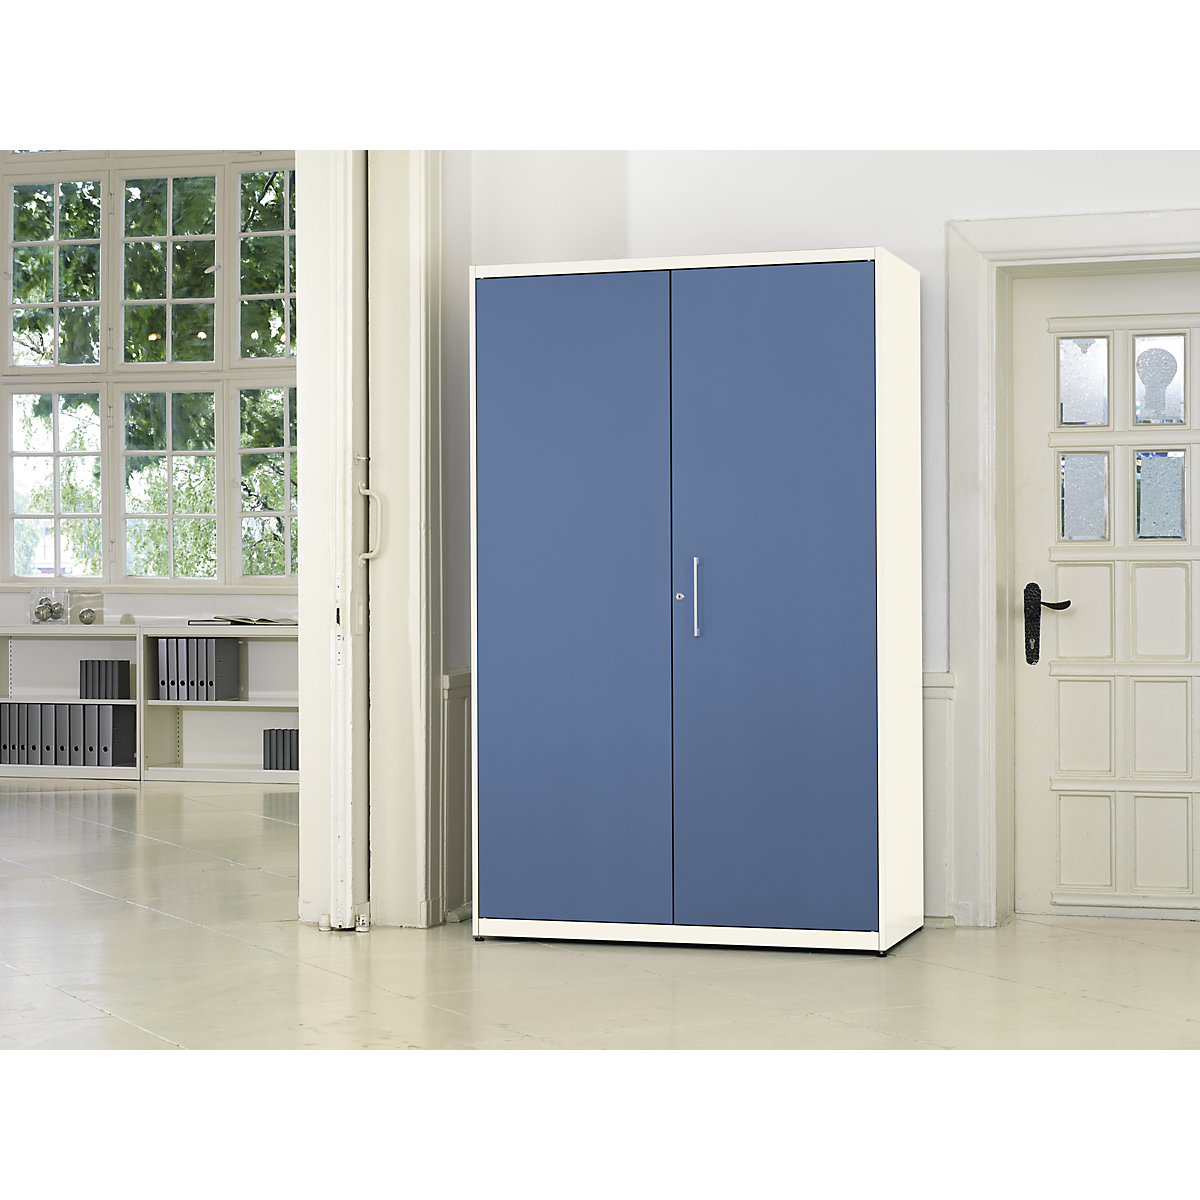 Double door cupboard – mauser, HxW 1956 x 1200 mm, steel cover plate, 4 shelves, pure white / pigeon blue / pure white-6